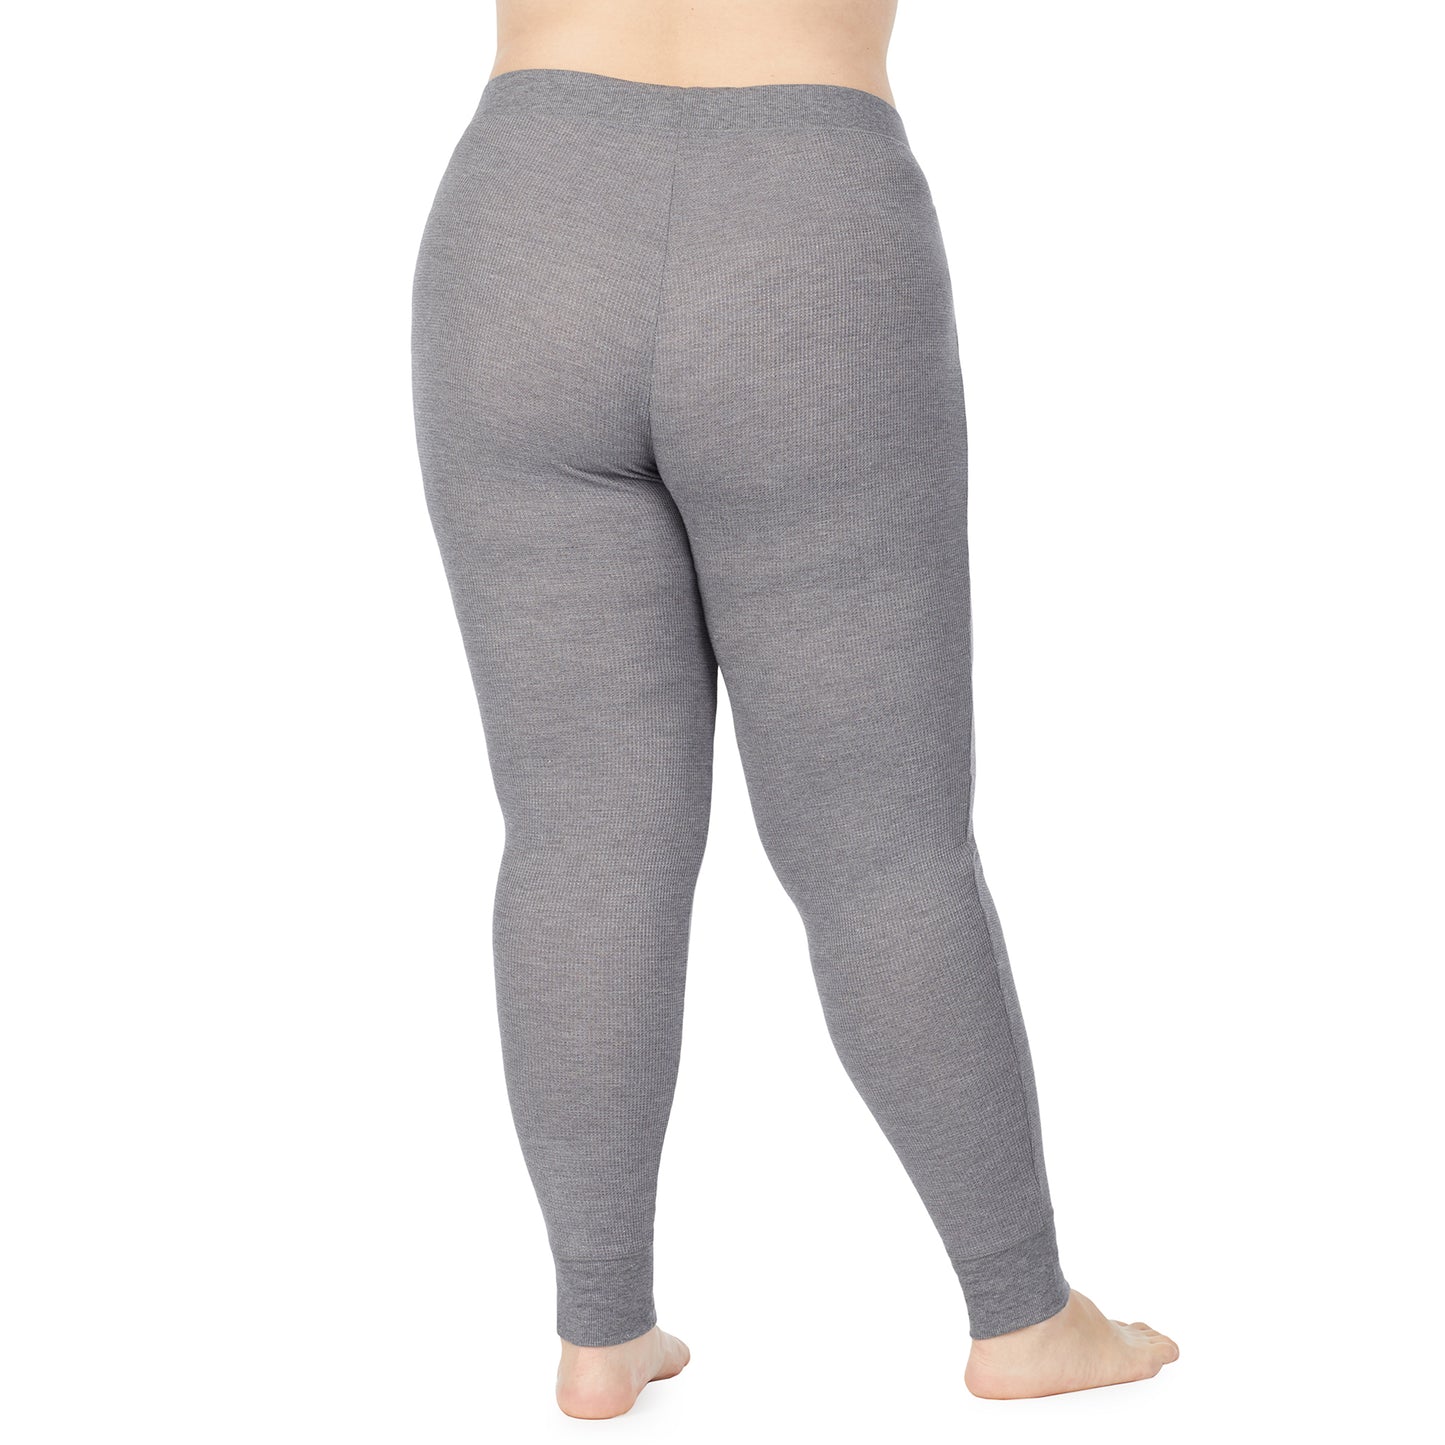 Stone Grey Heather; Model is wearing size 1X. She is 5'9", Bust 38", Waist 36", Hips 48.5".@A lady wearing a stone grey heather legging plus.